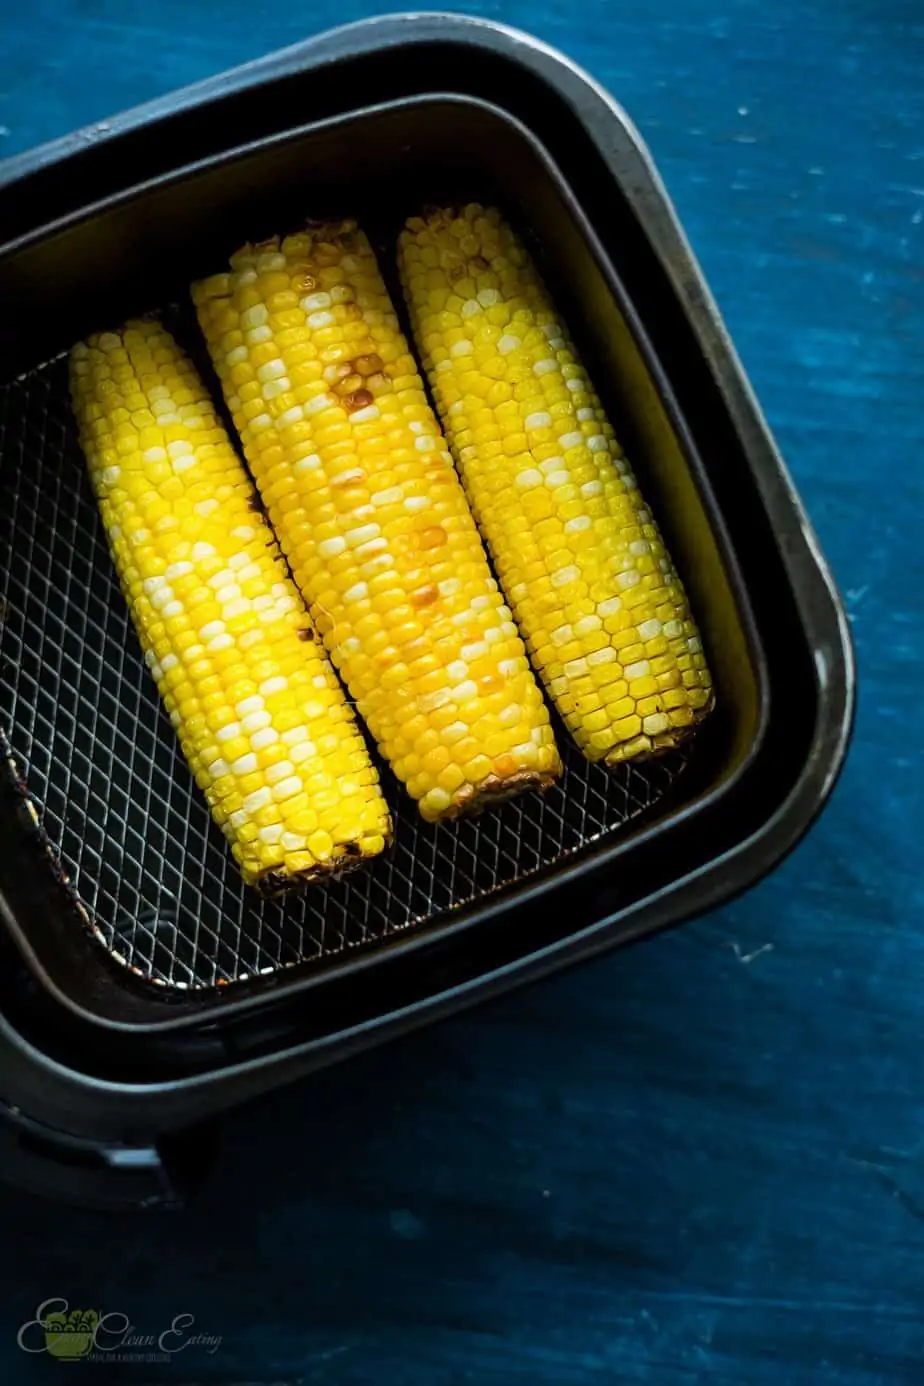 perfectly cooked corn on the corn inside the air fryer basket